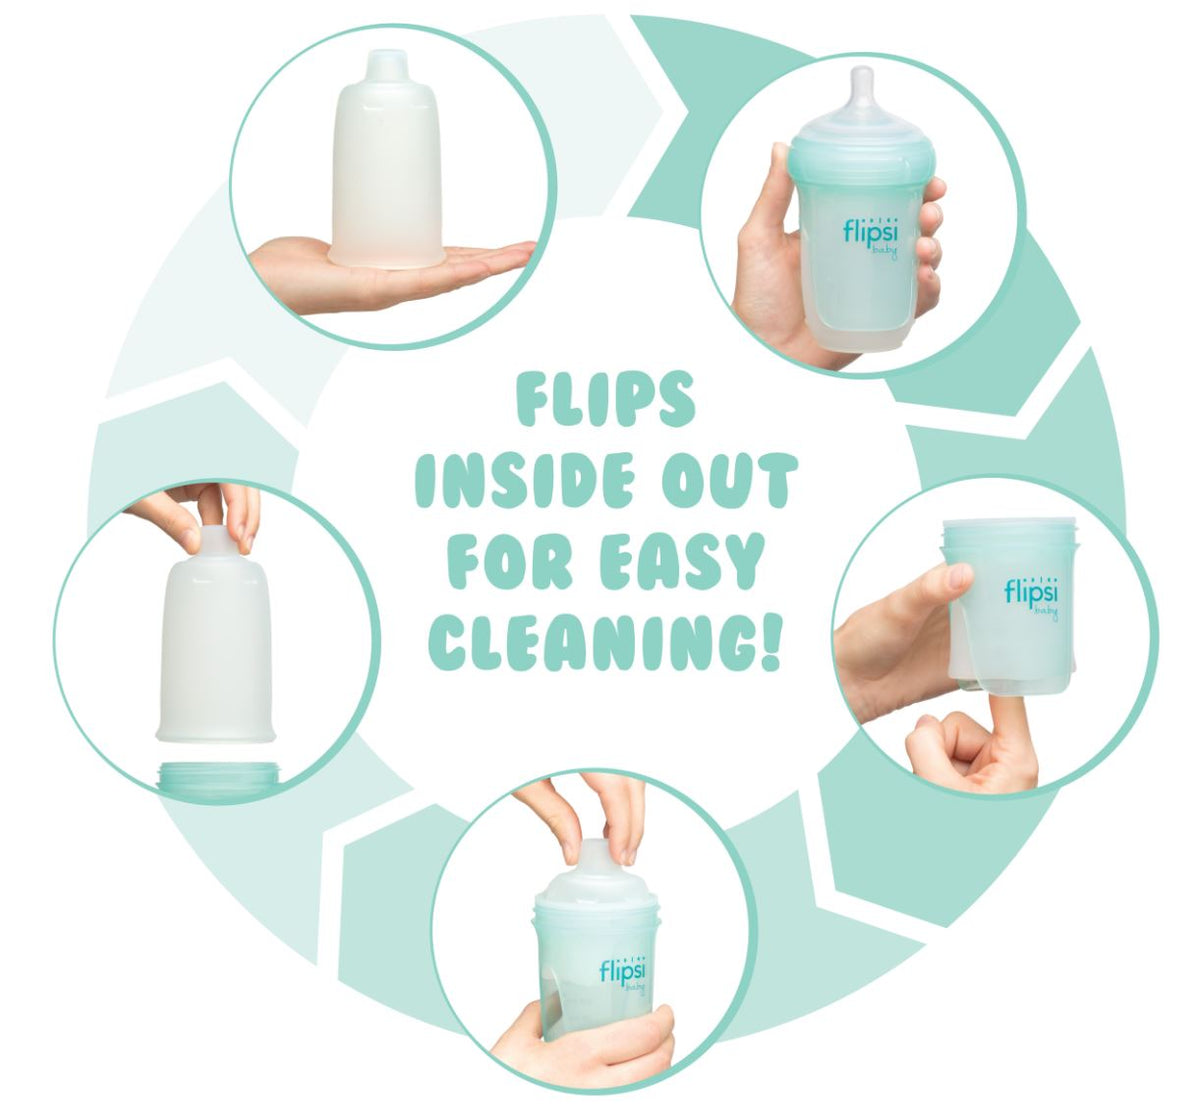 Flipsi Easy Clean Silicone Baby Bottle Flip Inside Out